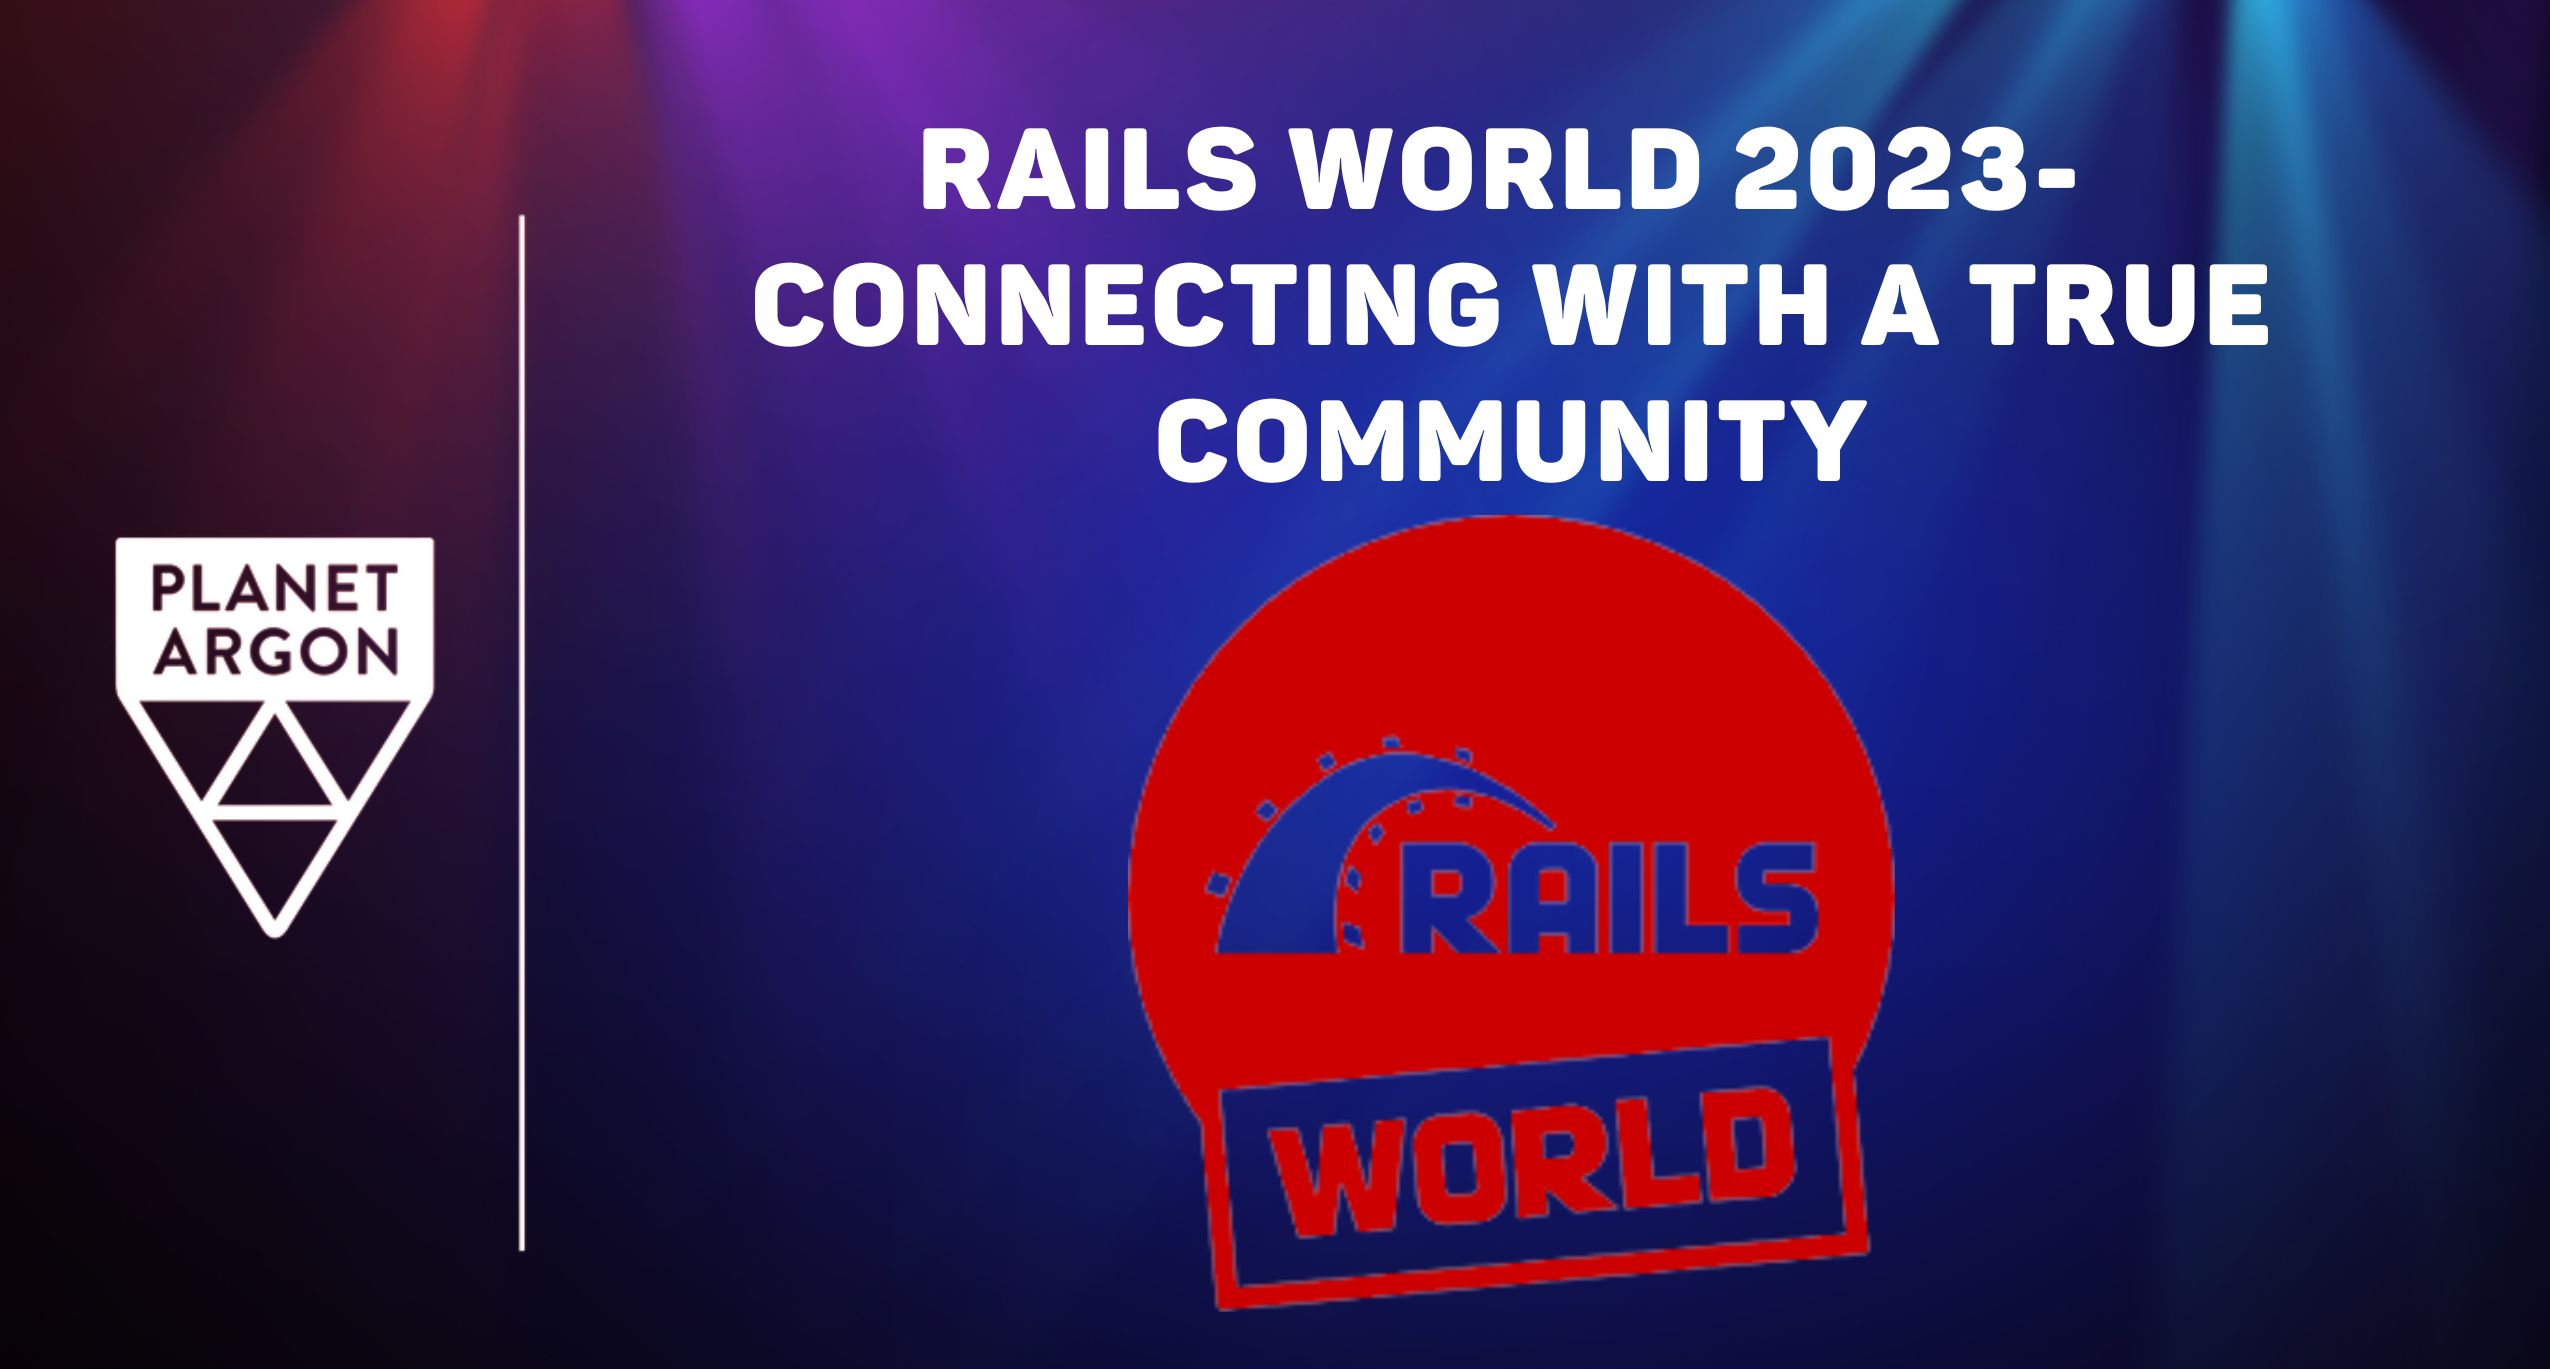 Rails World 2023- Connecting with a True Community